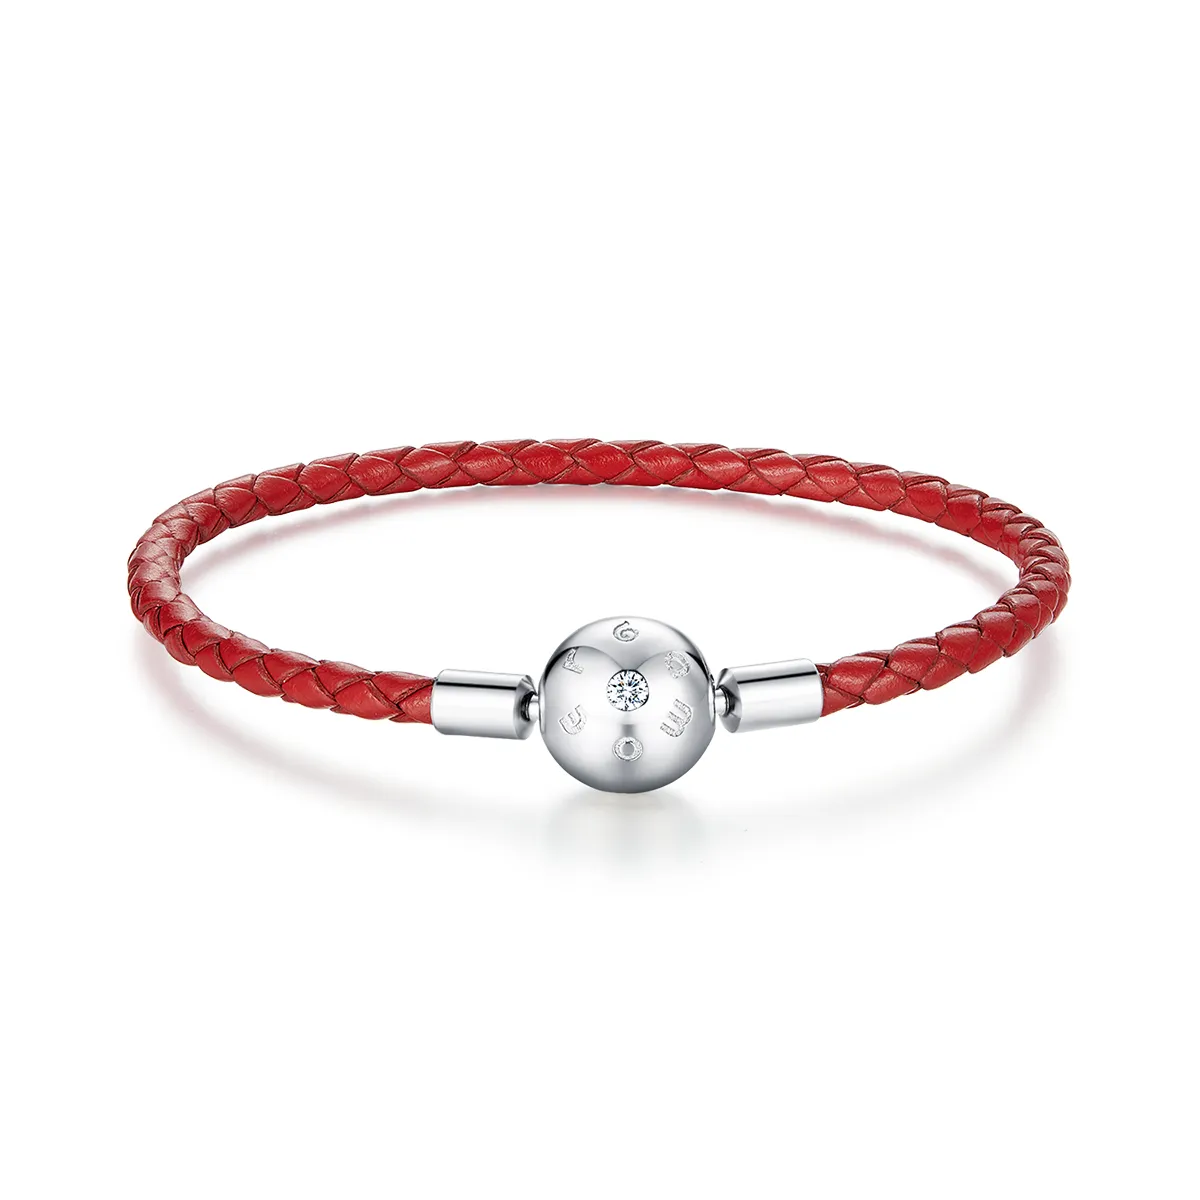 Pandora Style Silver Red Leather Leather bracelet - BSB042